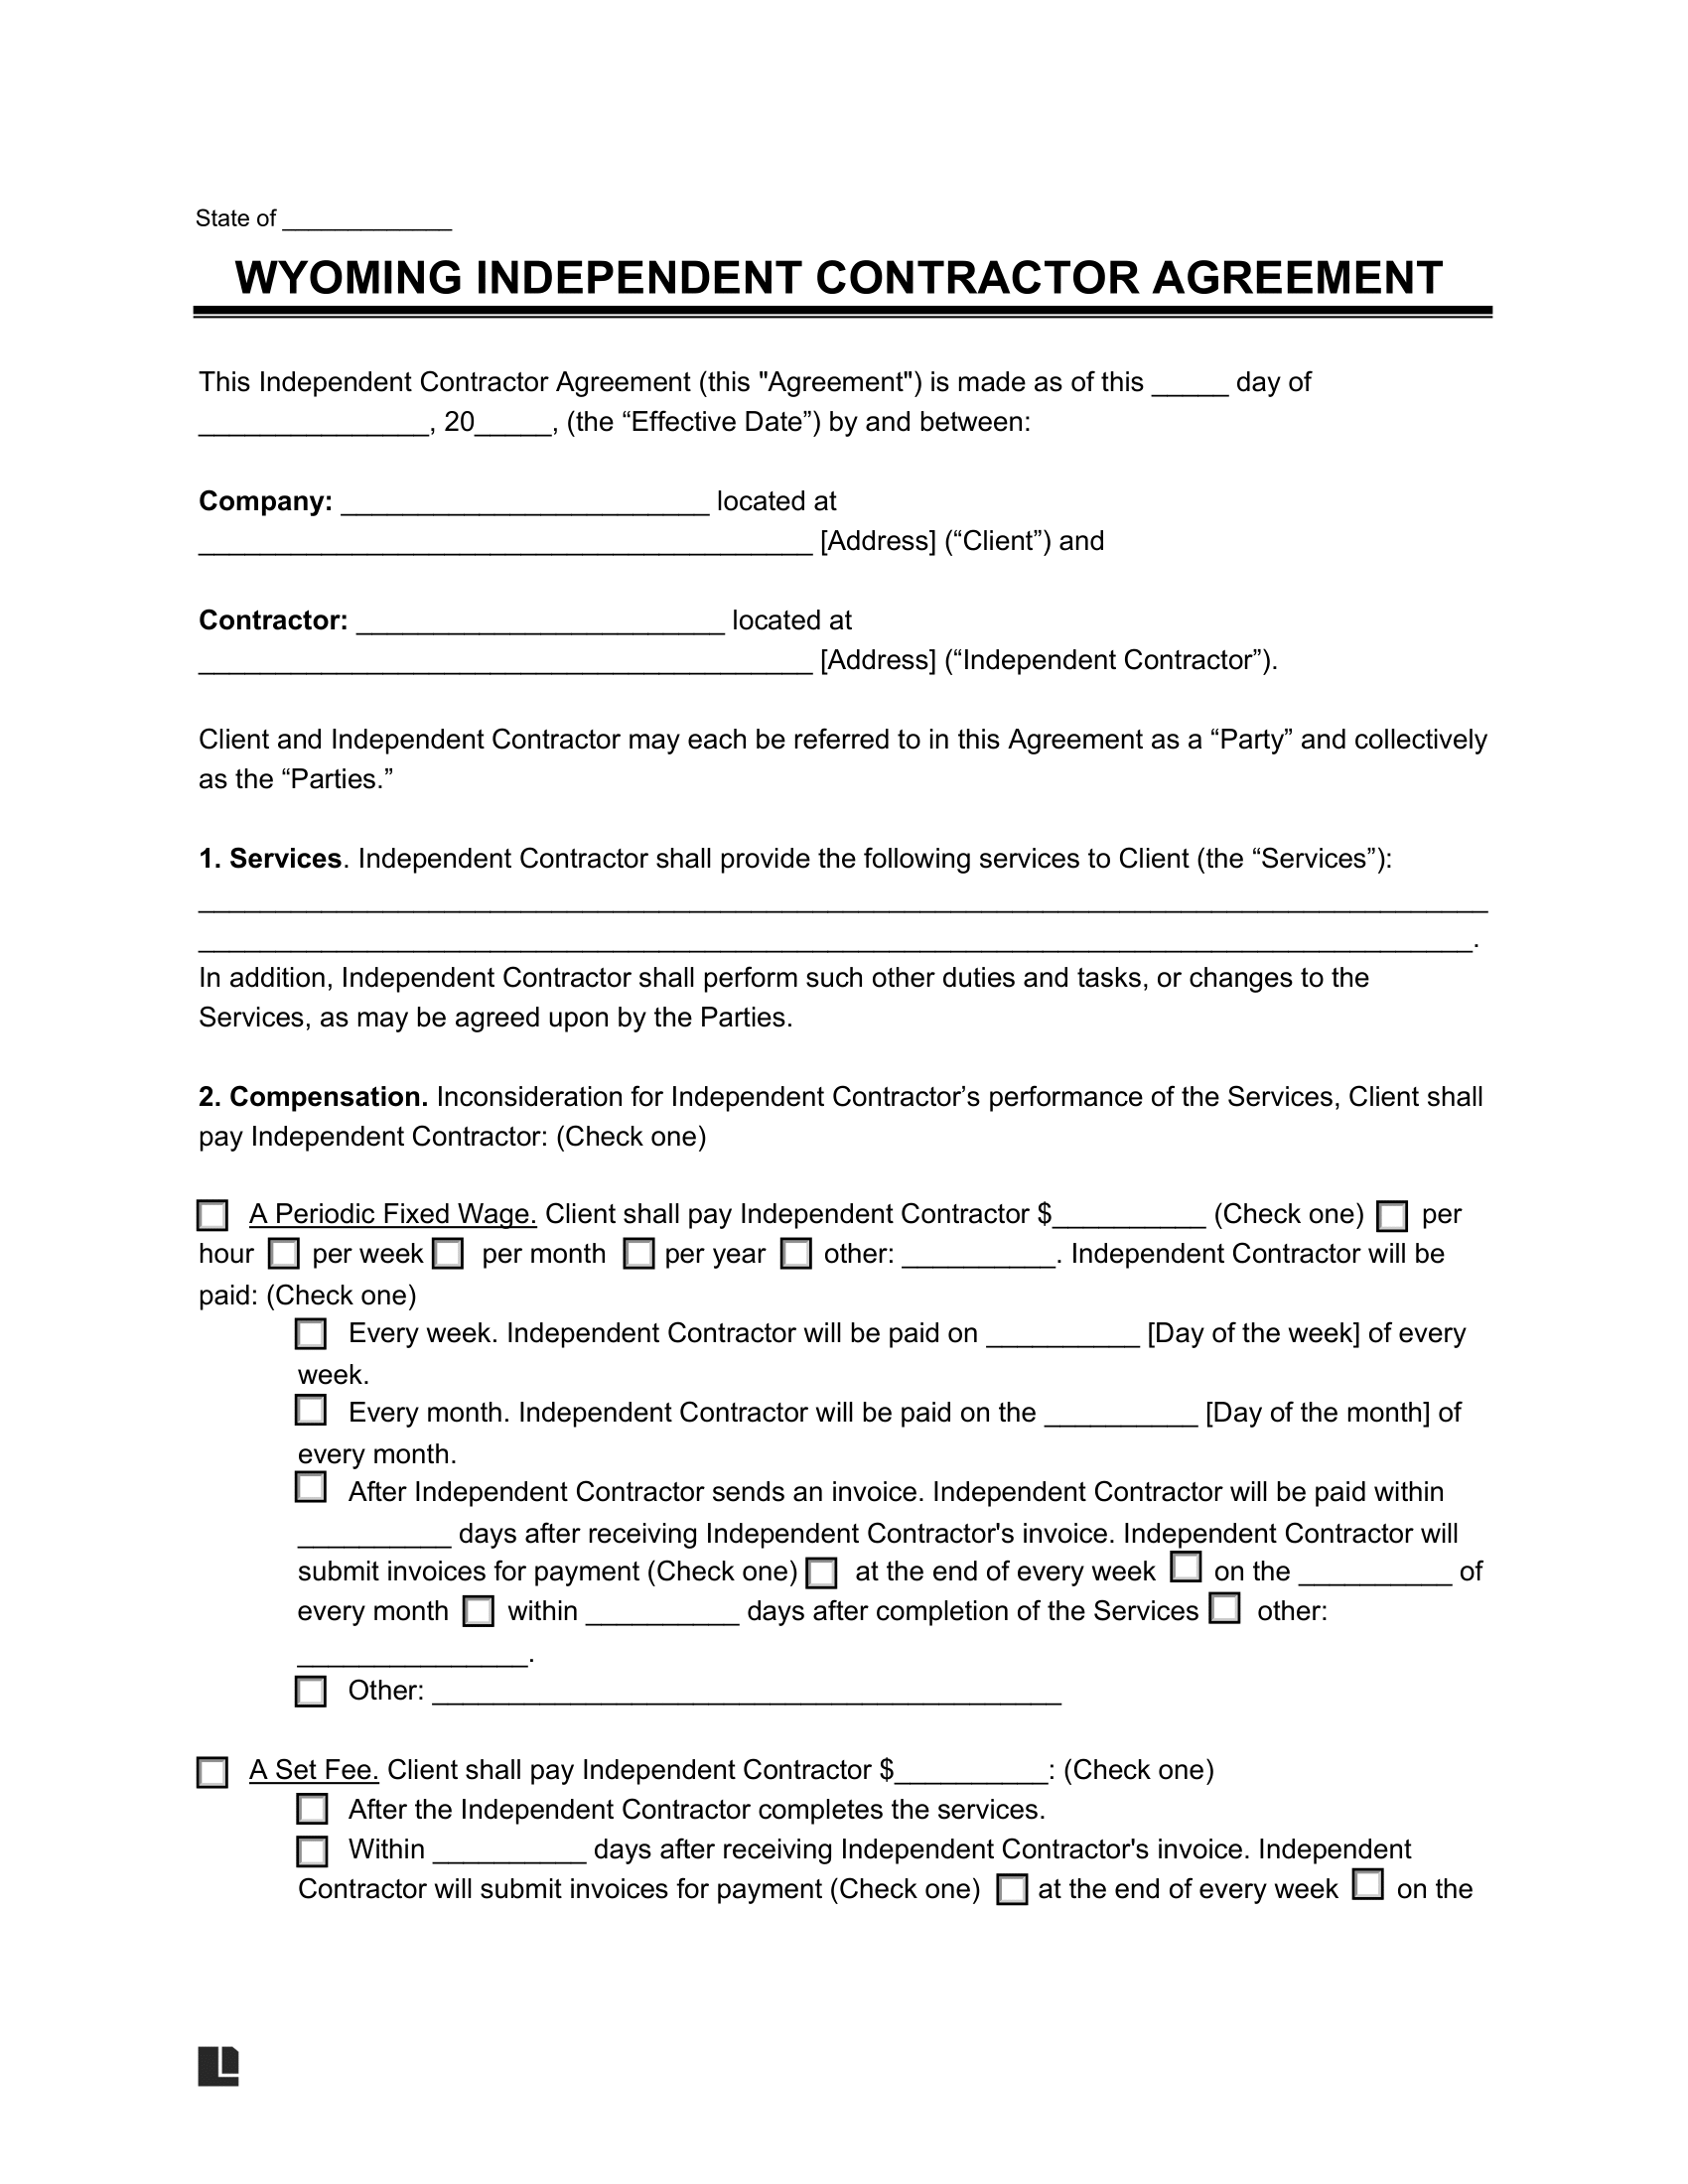 Wyoming Independent Contractor Agreement